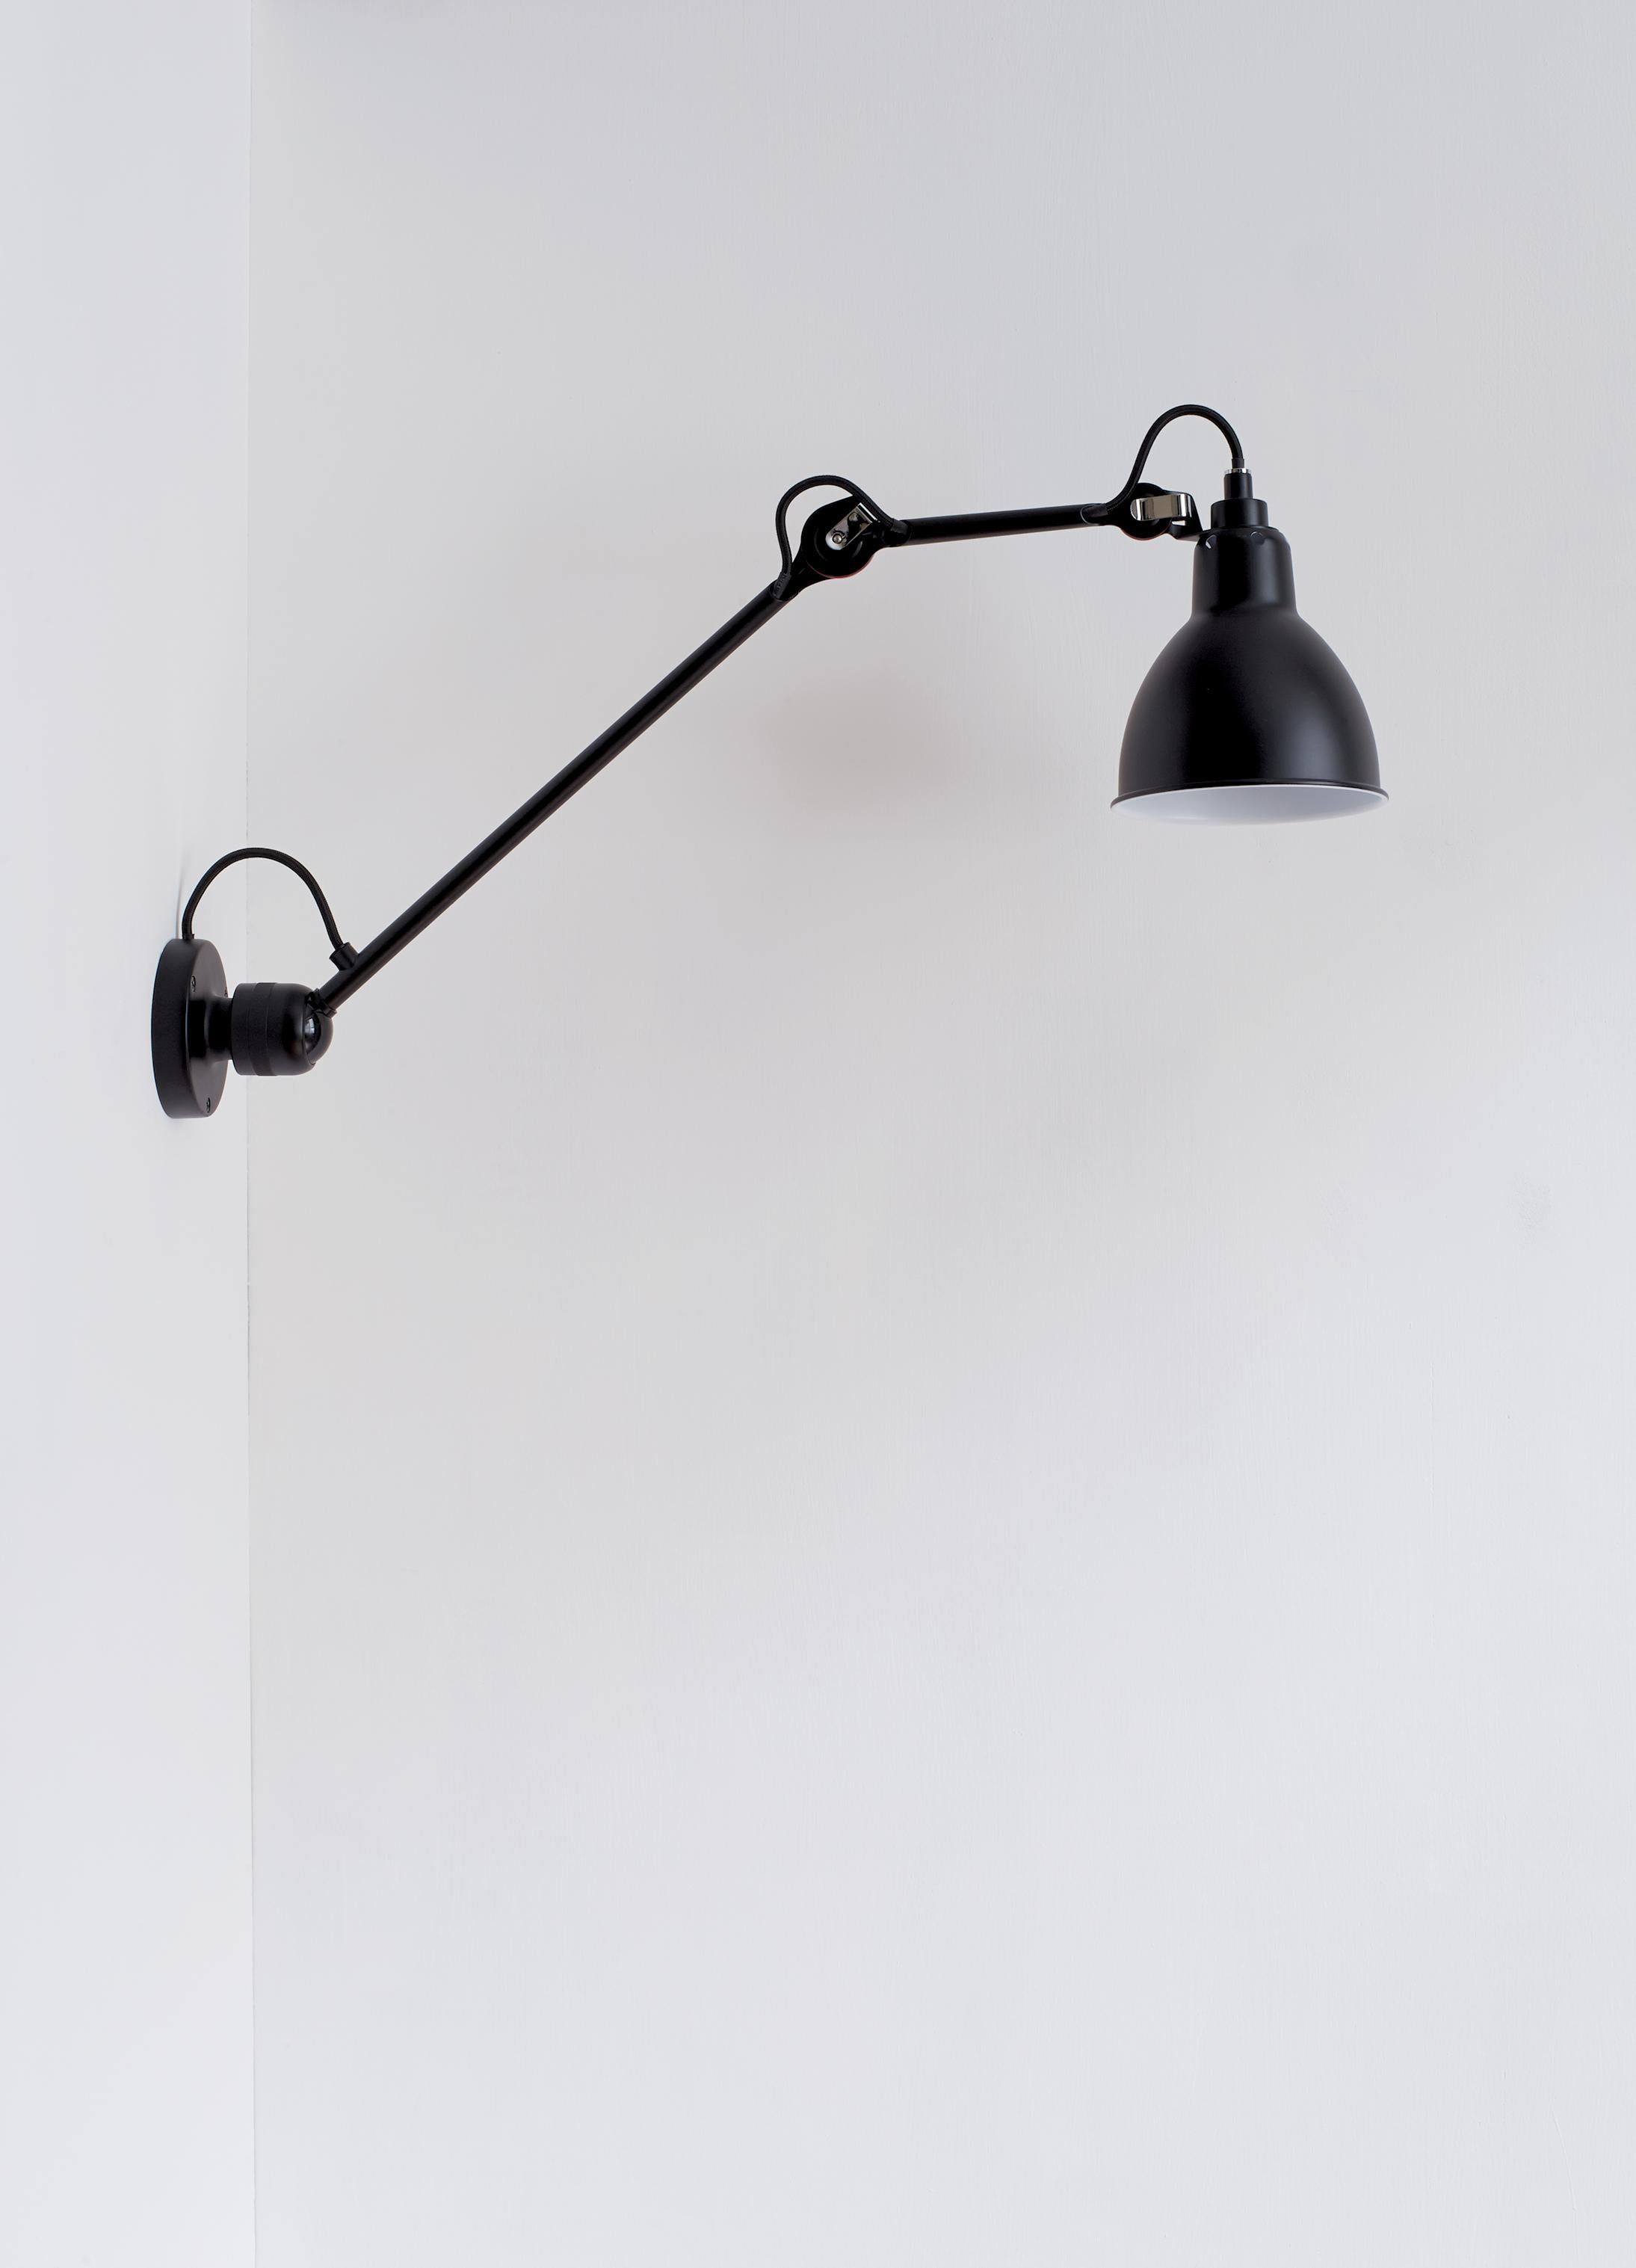 Black lampe Gras N° 304 L40 wall lamp by Bernard-Albin Gras
Dimensions: D 40 x W 14 x H 14 cm
Materials: Steel
Also available: Different colors and another shade available.

All our lamps can be wired according to each country. If sold to the